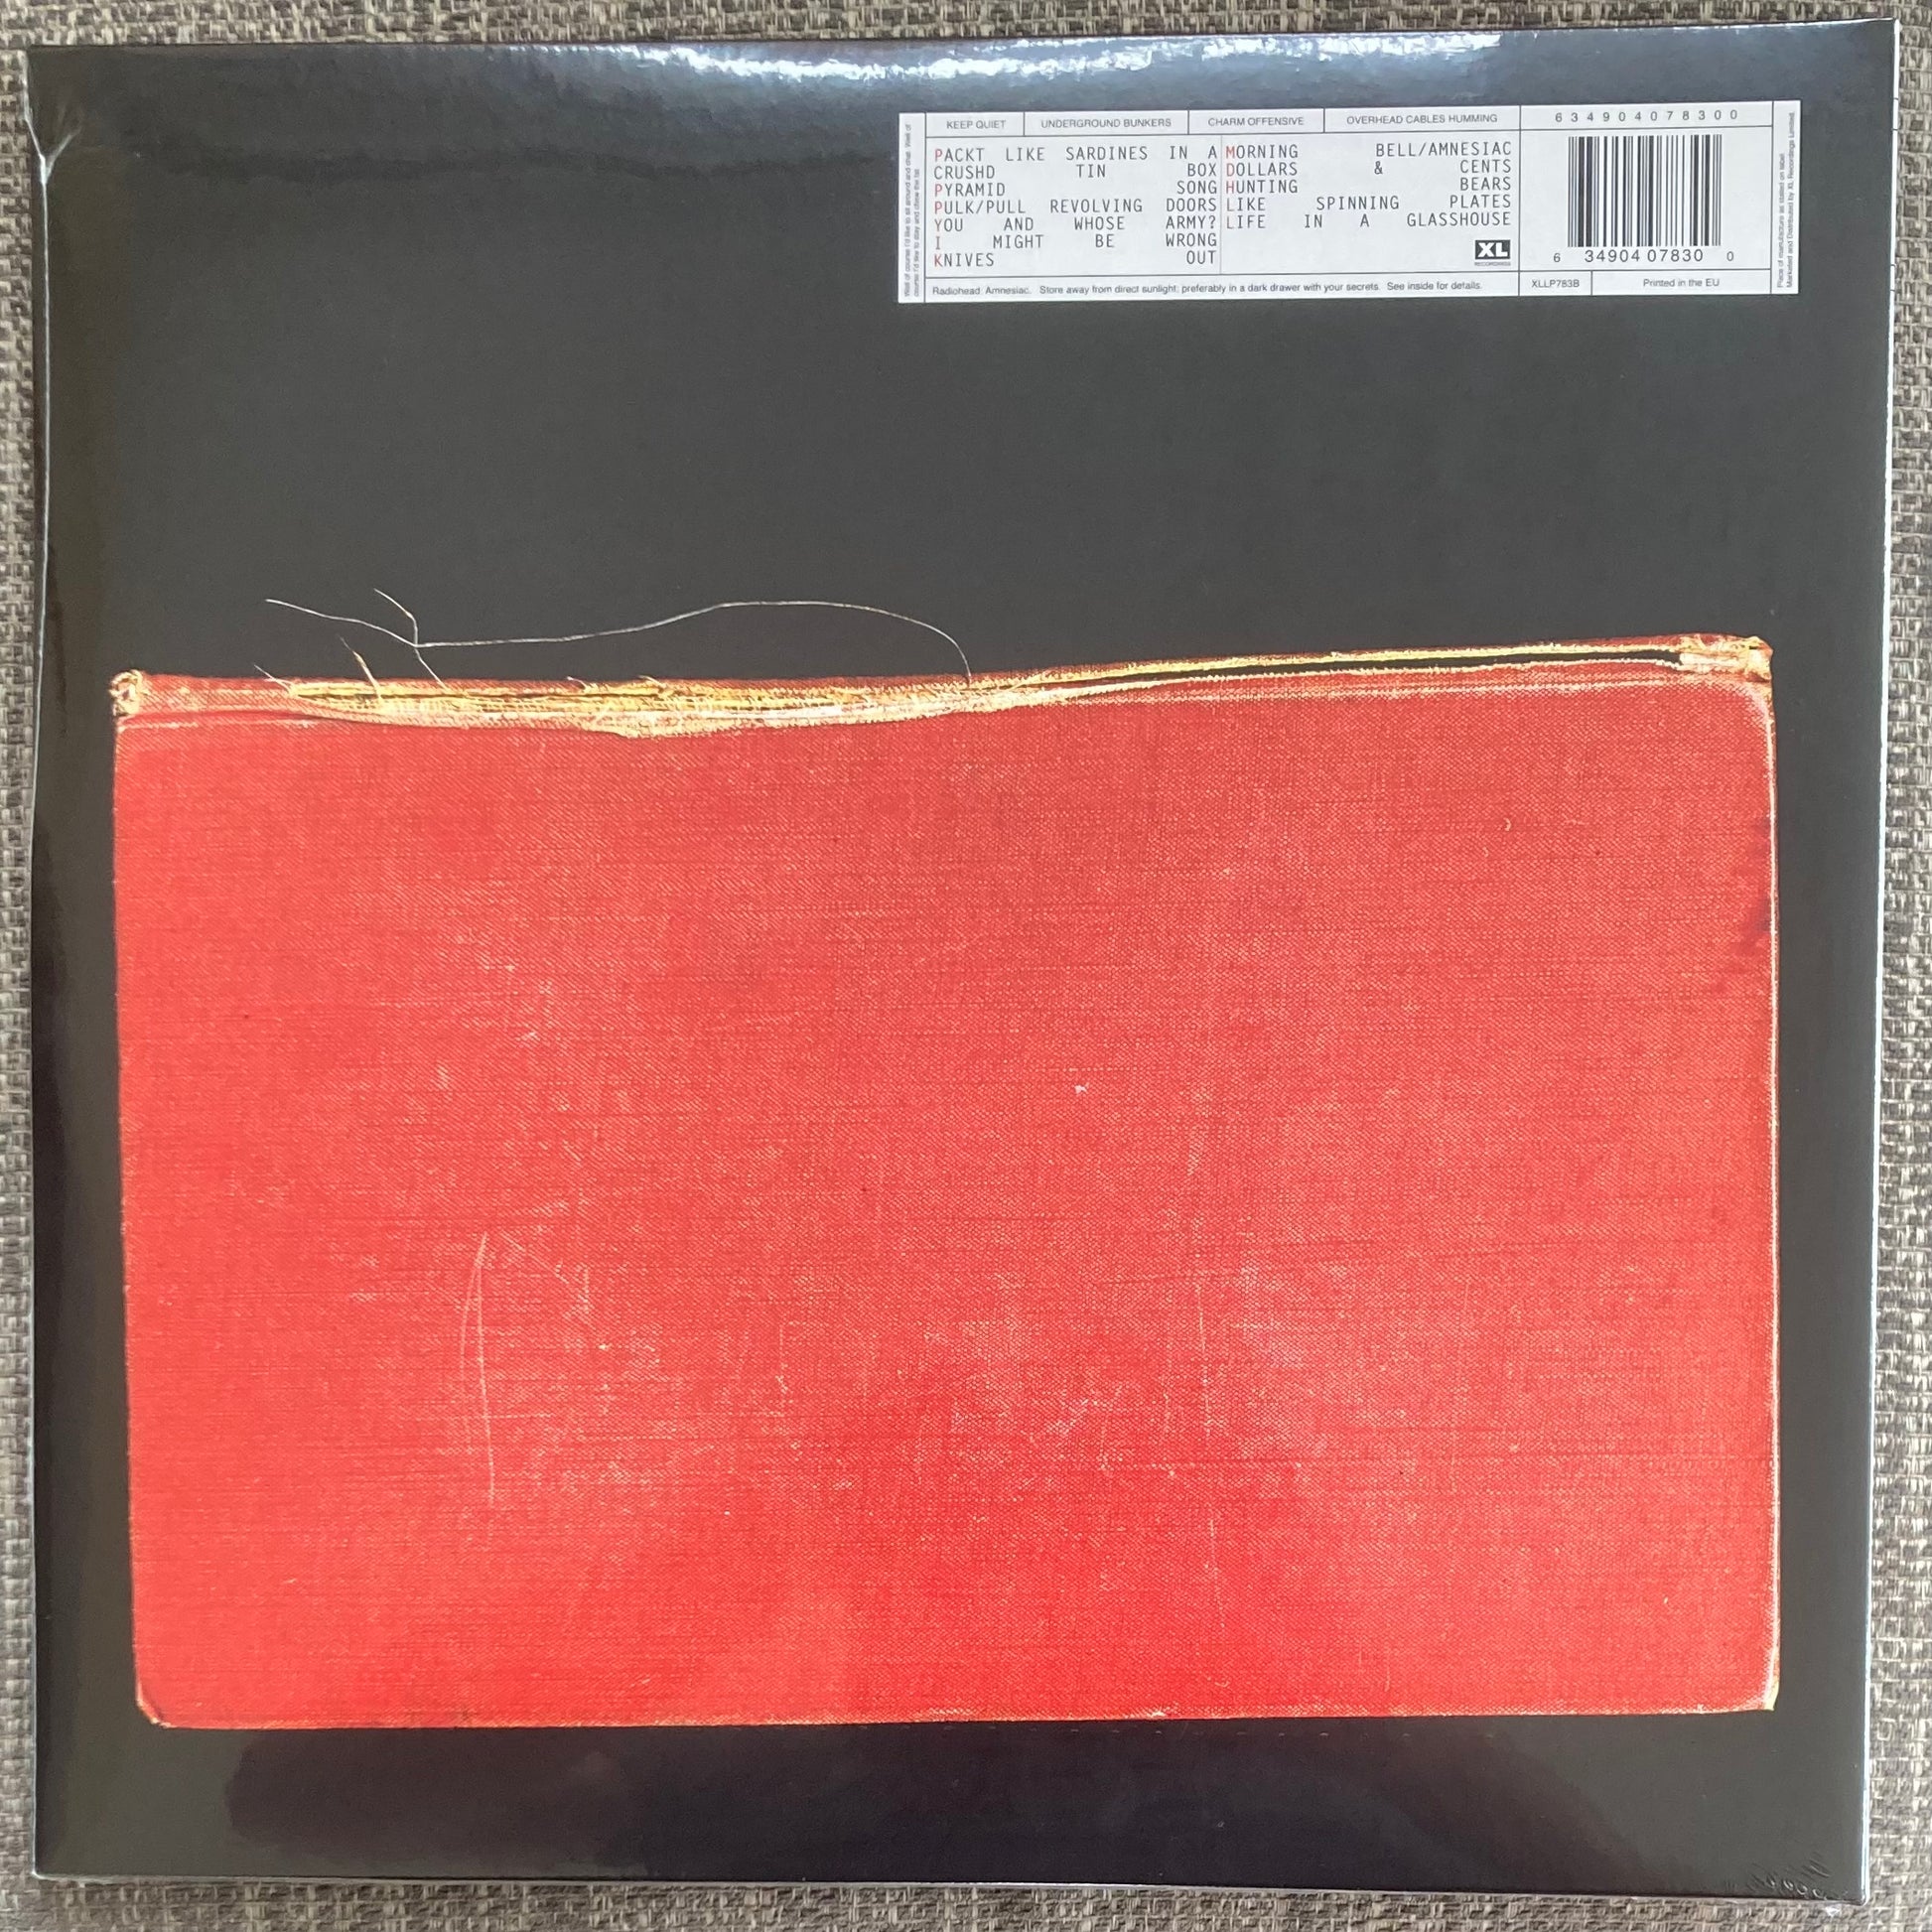 The back of 'Radiohead - Amnesiac' on vinyl. It is sealed and unplayed